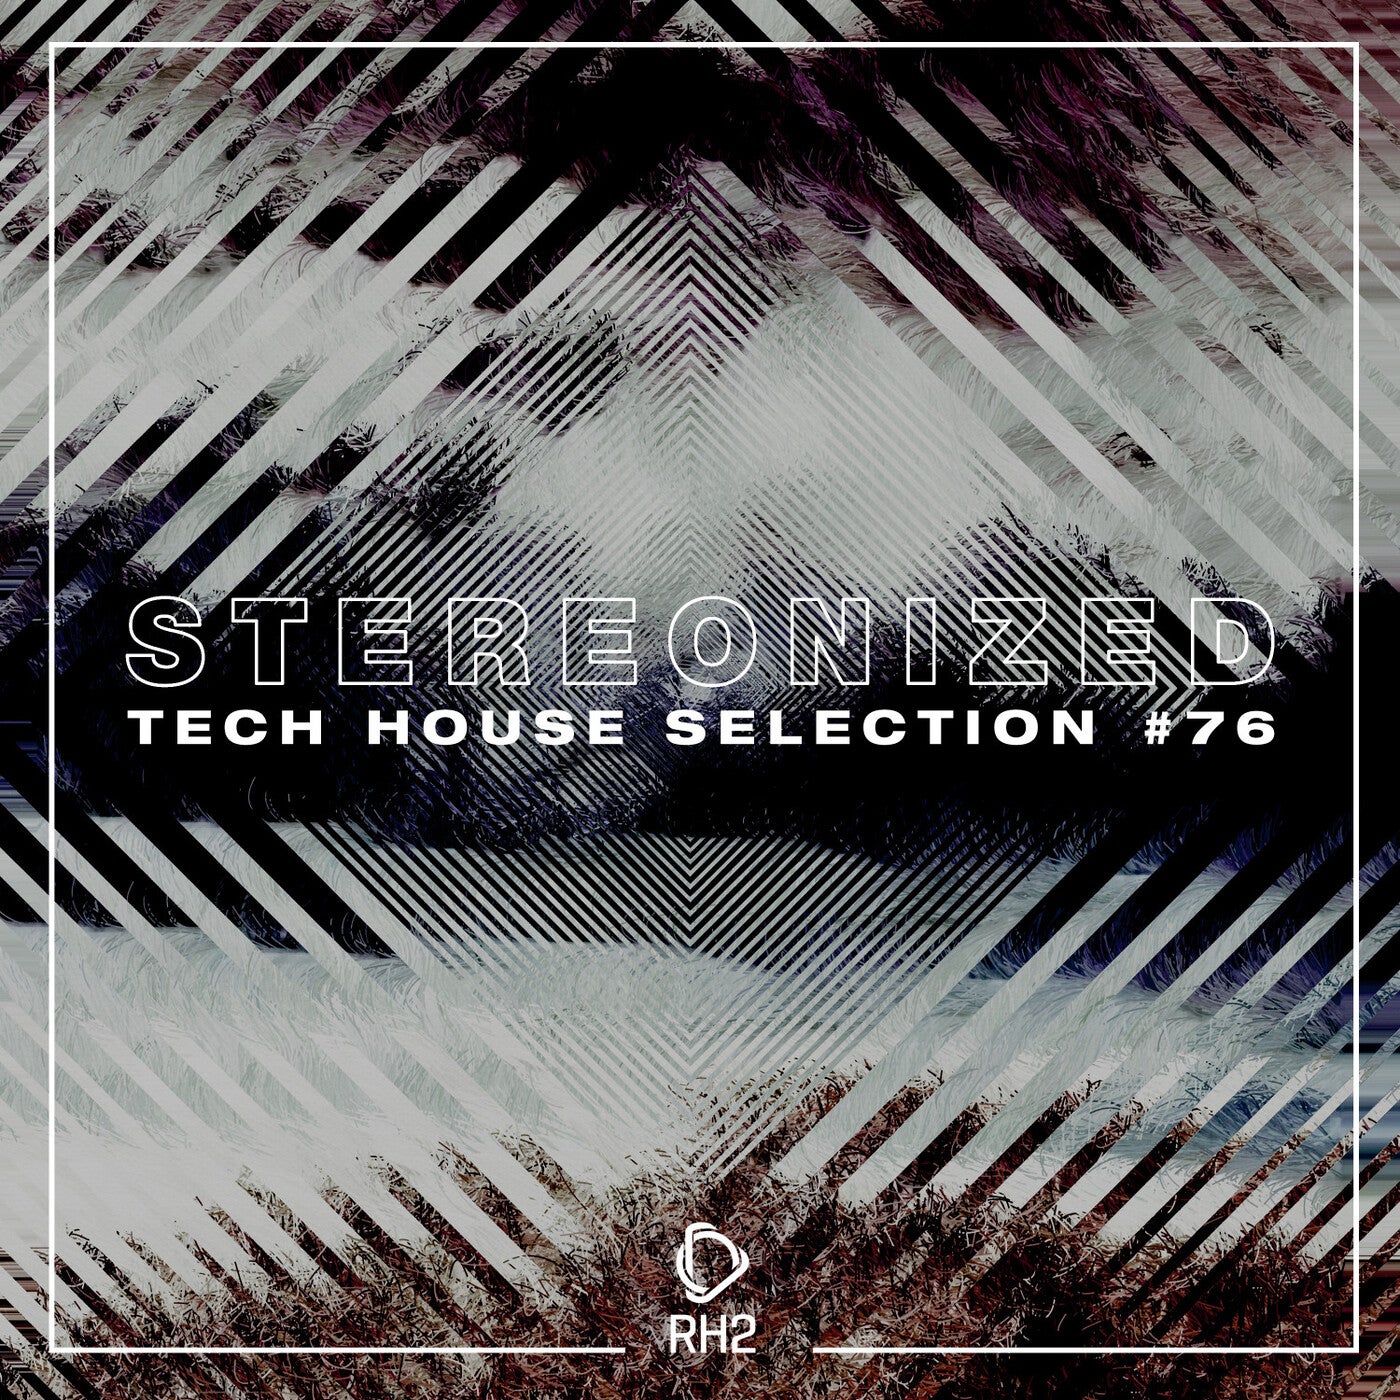 Stereonized: Tech House Selection Vol. 76